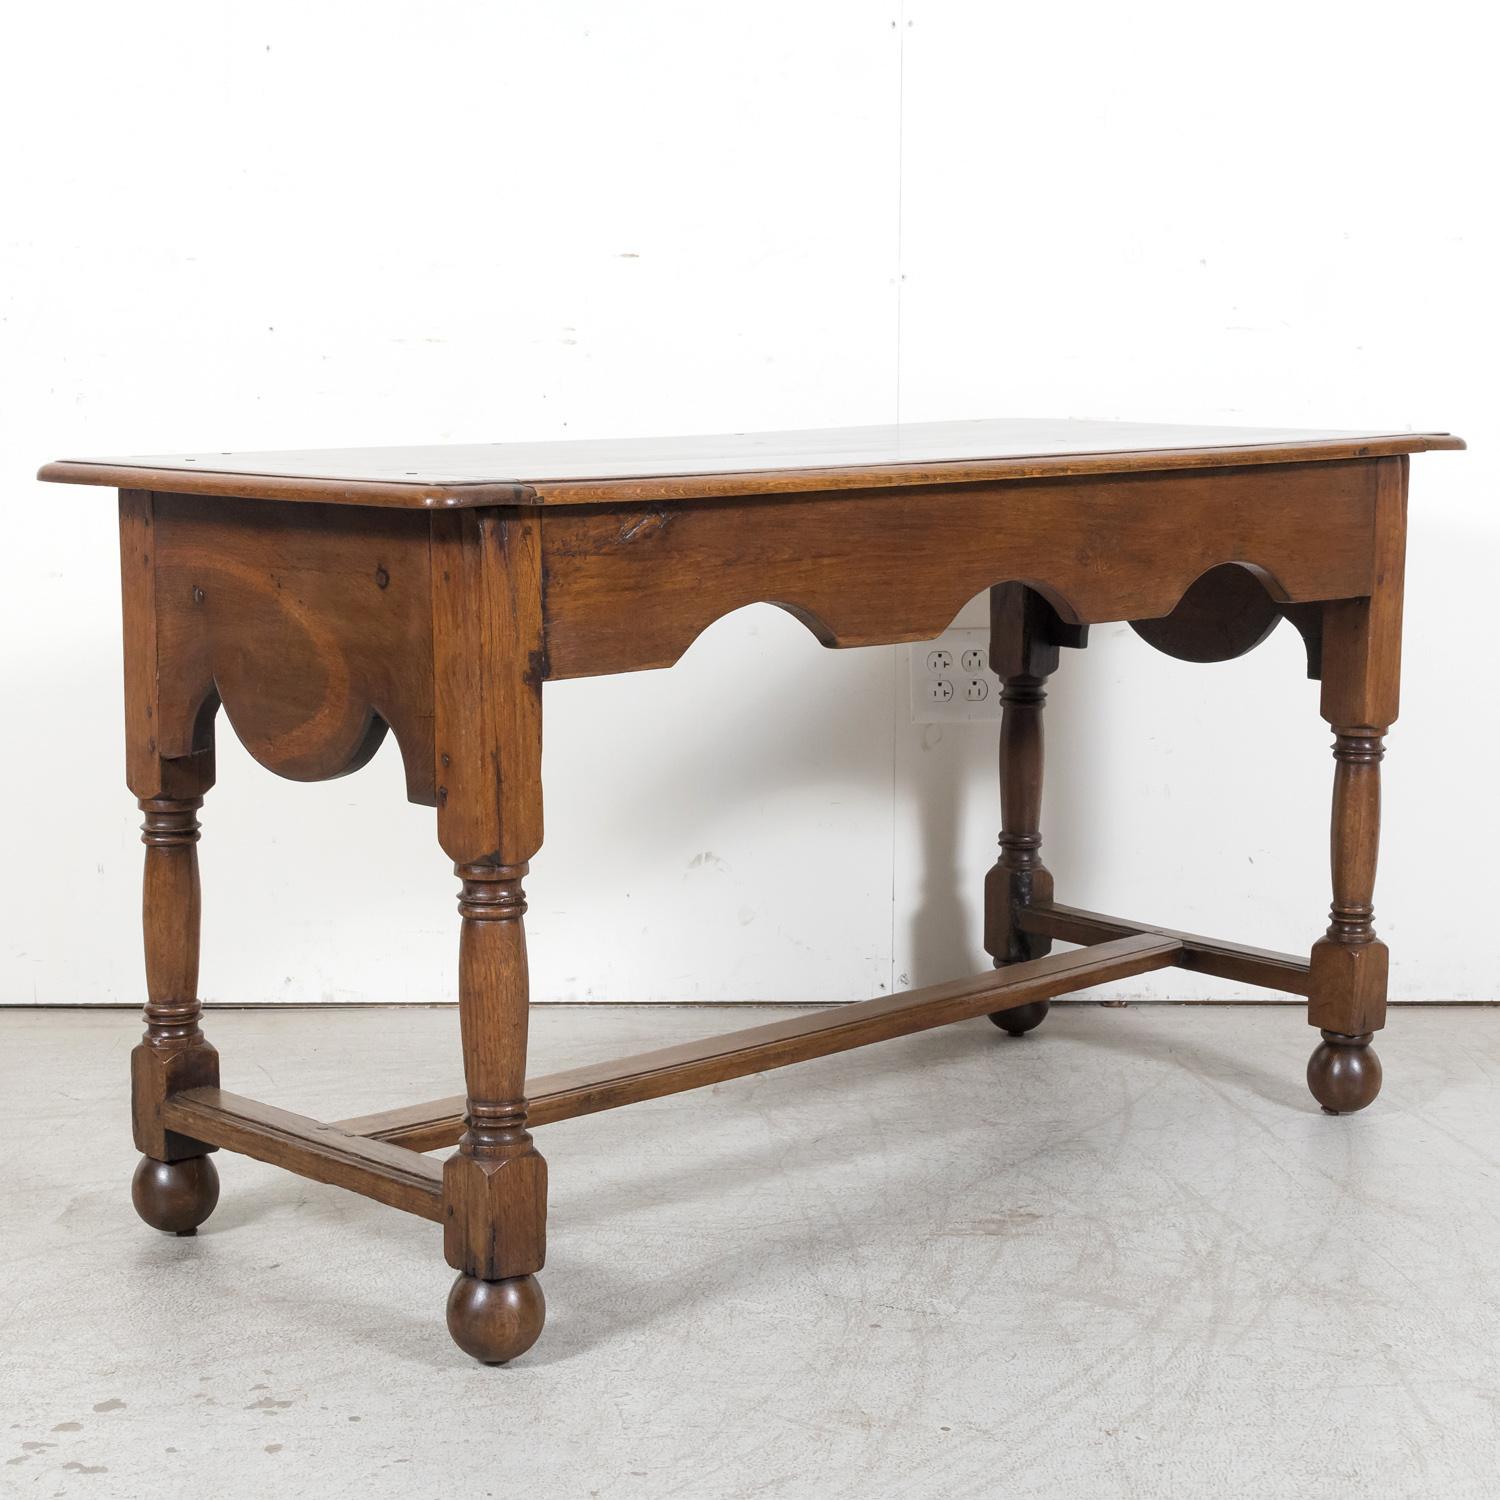 A mid-19th century French Louis Philippe period console or library table, handcrafted of solid oak near Etretat, a picturesque seaside town situated on the Alabaster coast in Normandy, circa 1830s. Versatile in its functionality, this antique